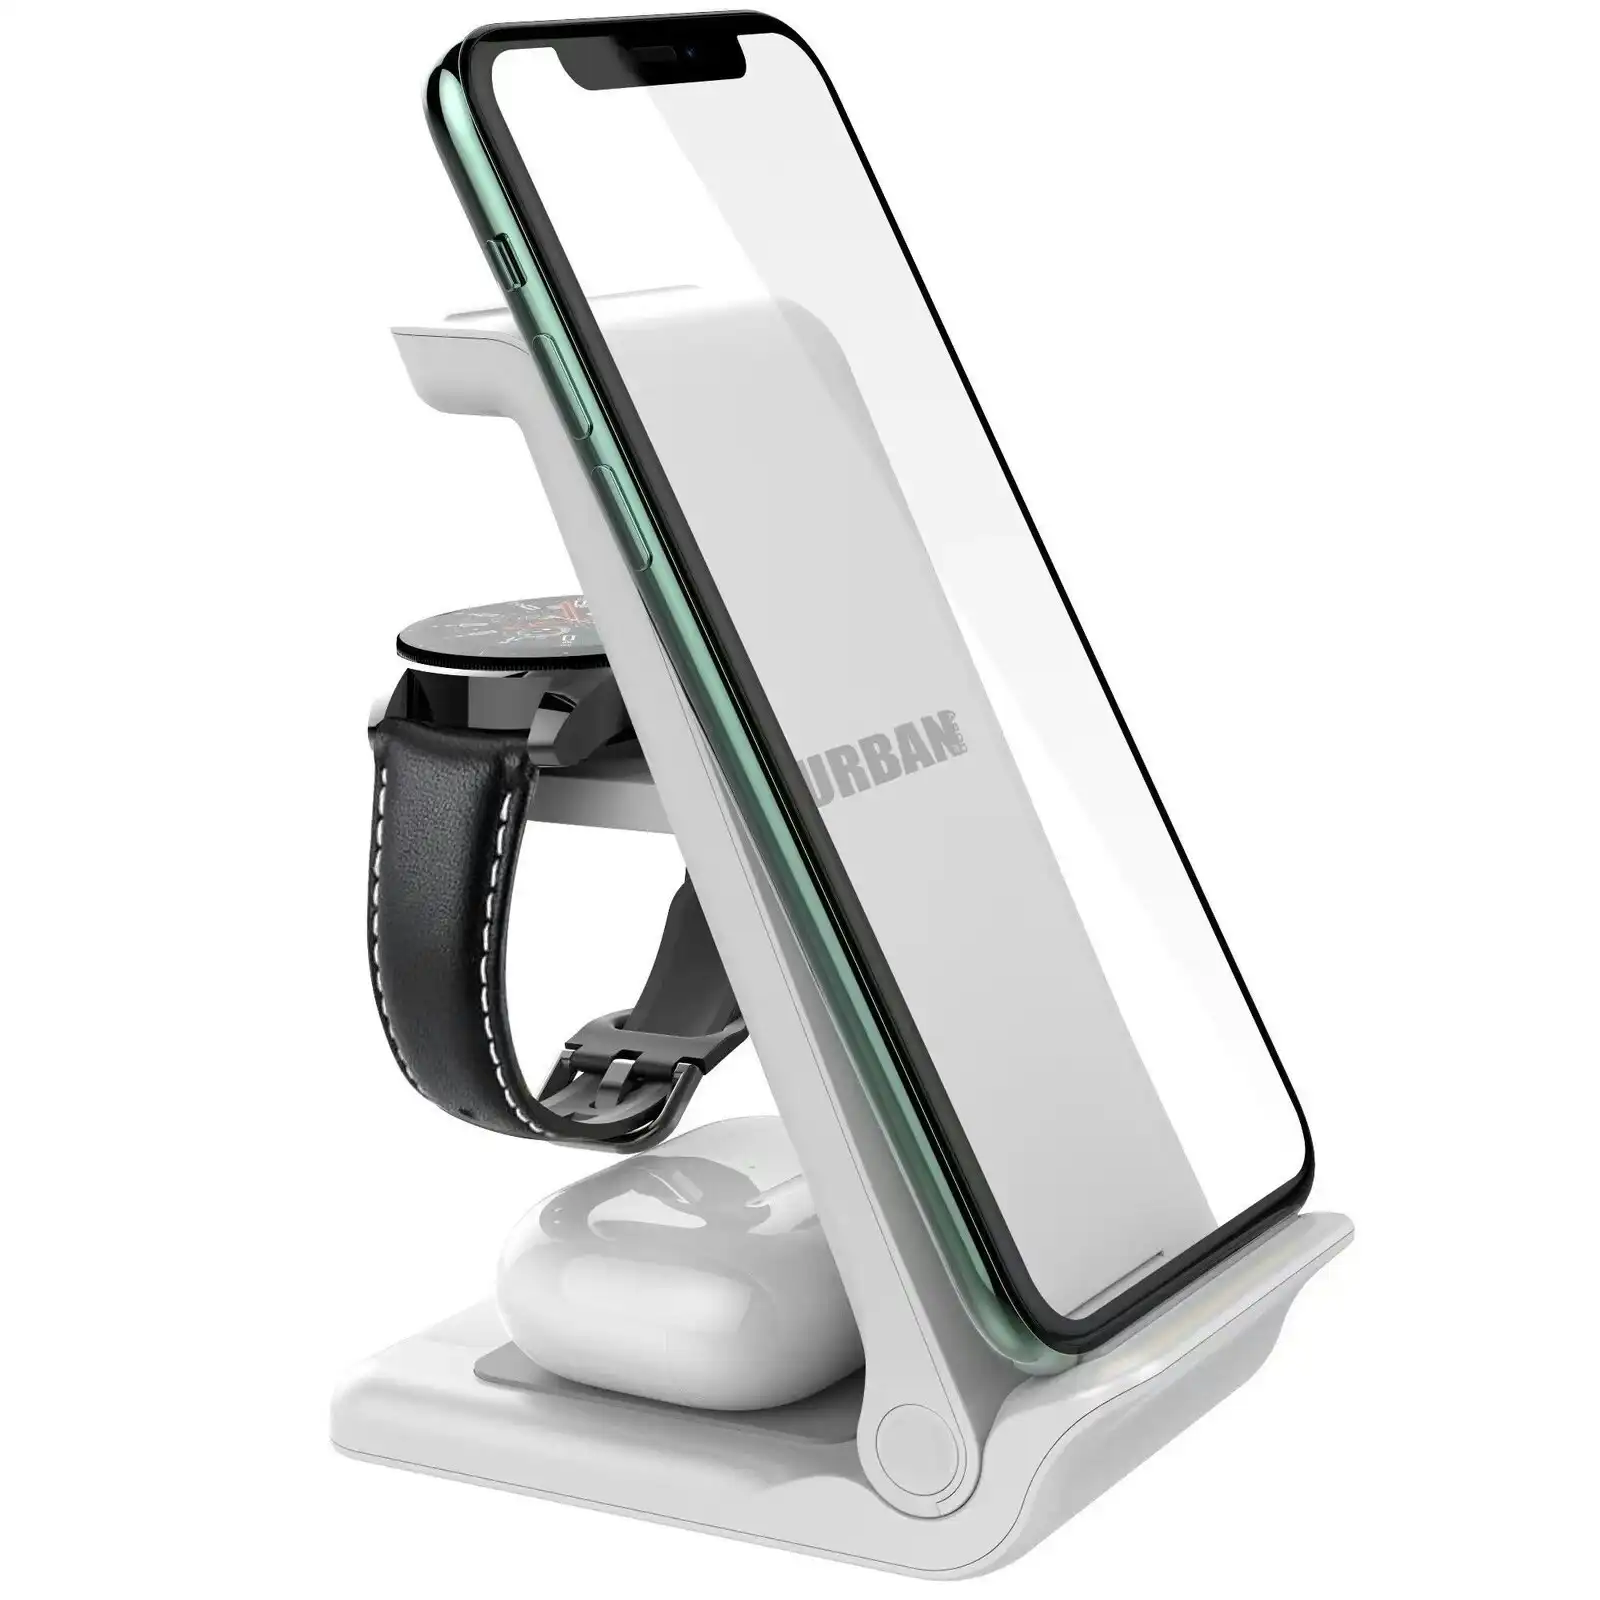 Urban Travel S 3in1 Foldable Wireless Charger Dock/Stand For Smartphones White